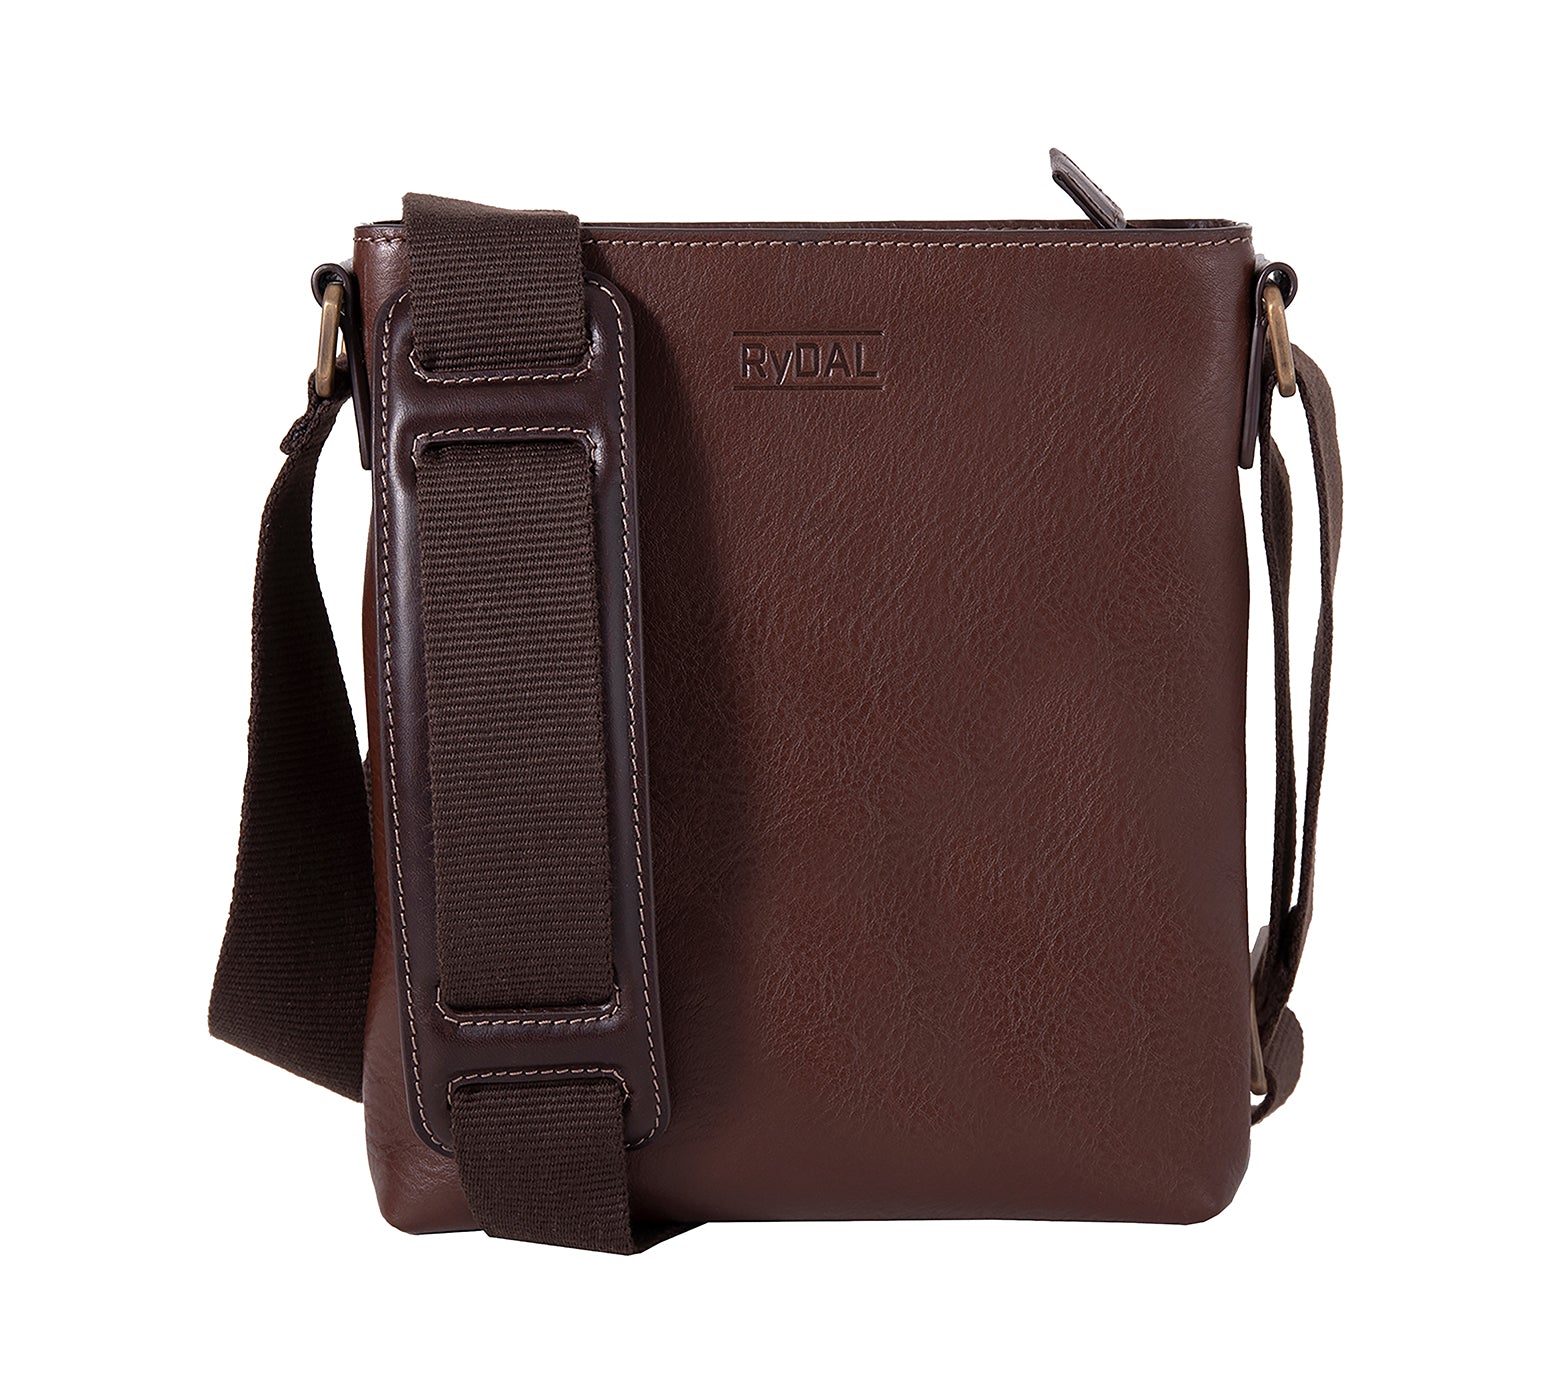 The Lucca Mens Leather Shoulder Bag from Rydal in 'Dark Brown'.